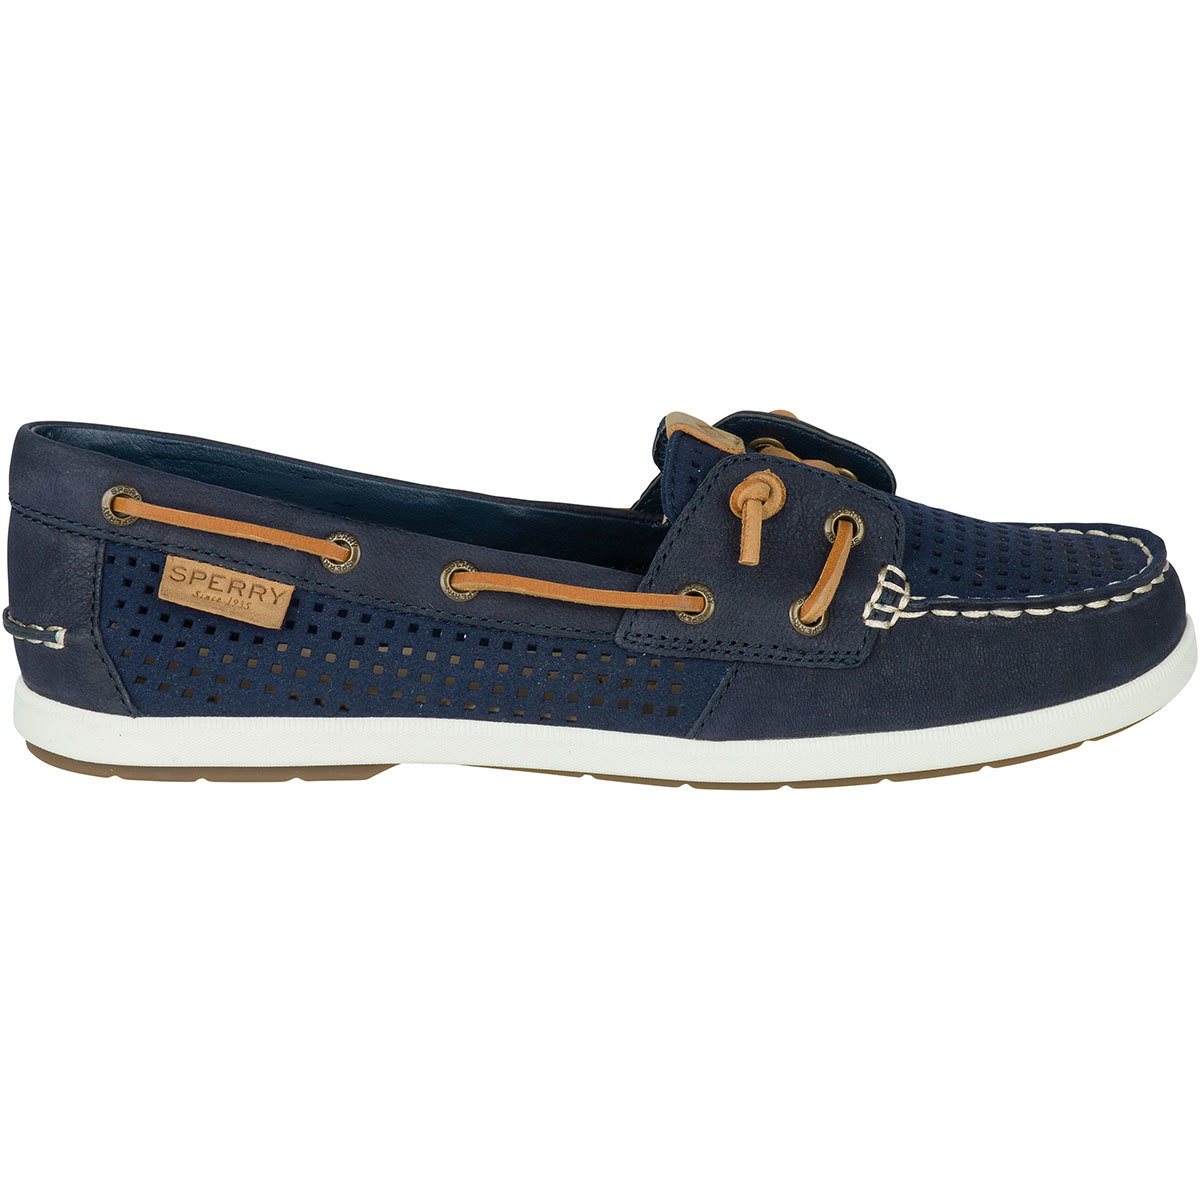 womens navy sperry shoes